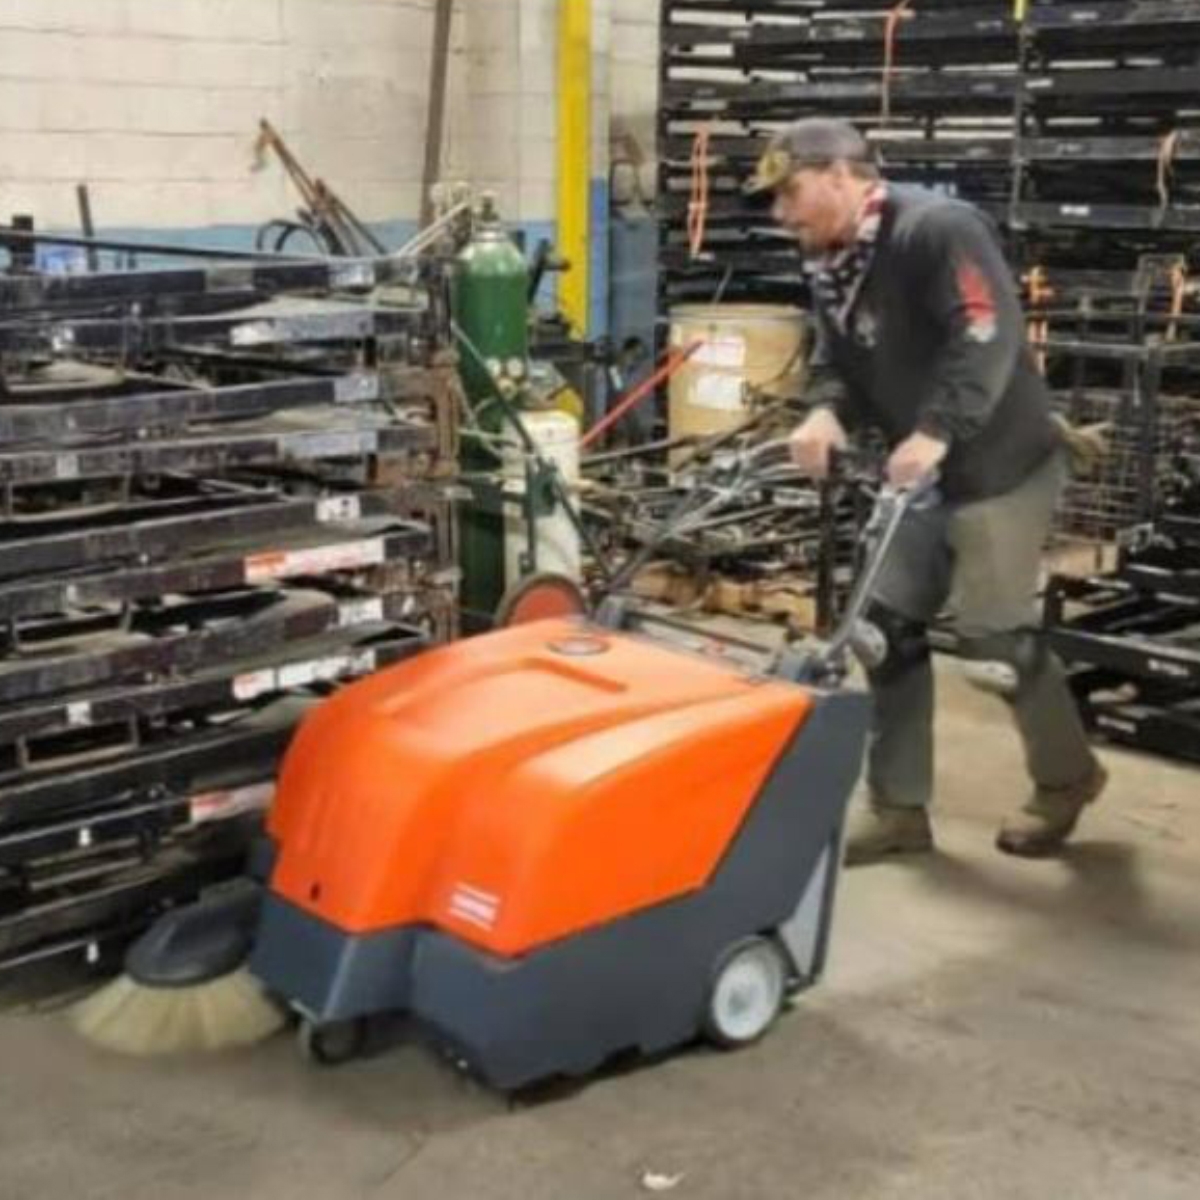 The Collector series of industrial floor sweepers are ideal for shopping centers, warehouses, outdoor cleanup, manufacturing facilities and other establishments that require outstanding sweeping performance.